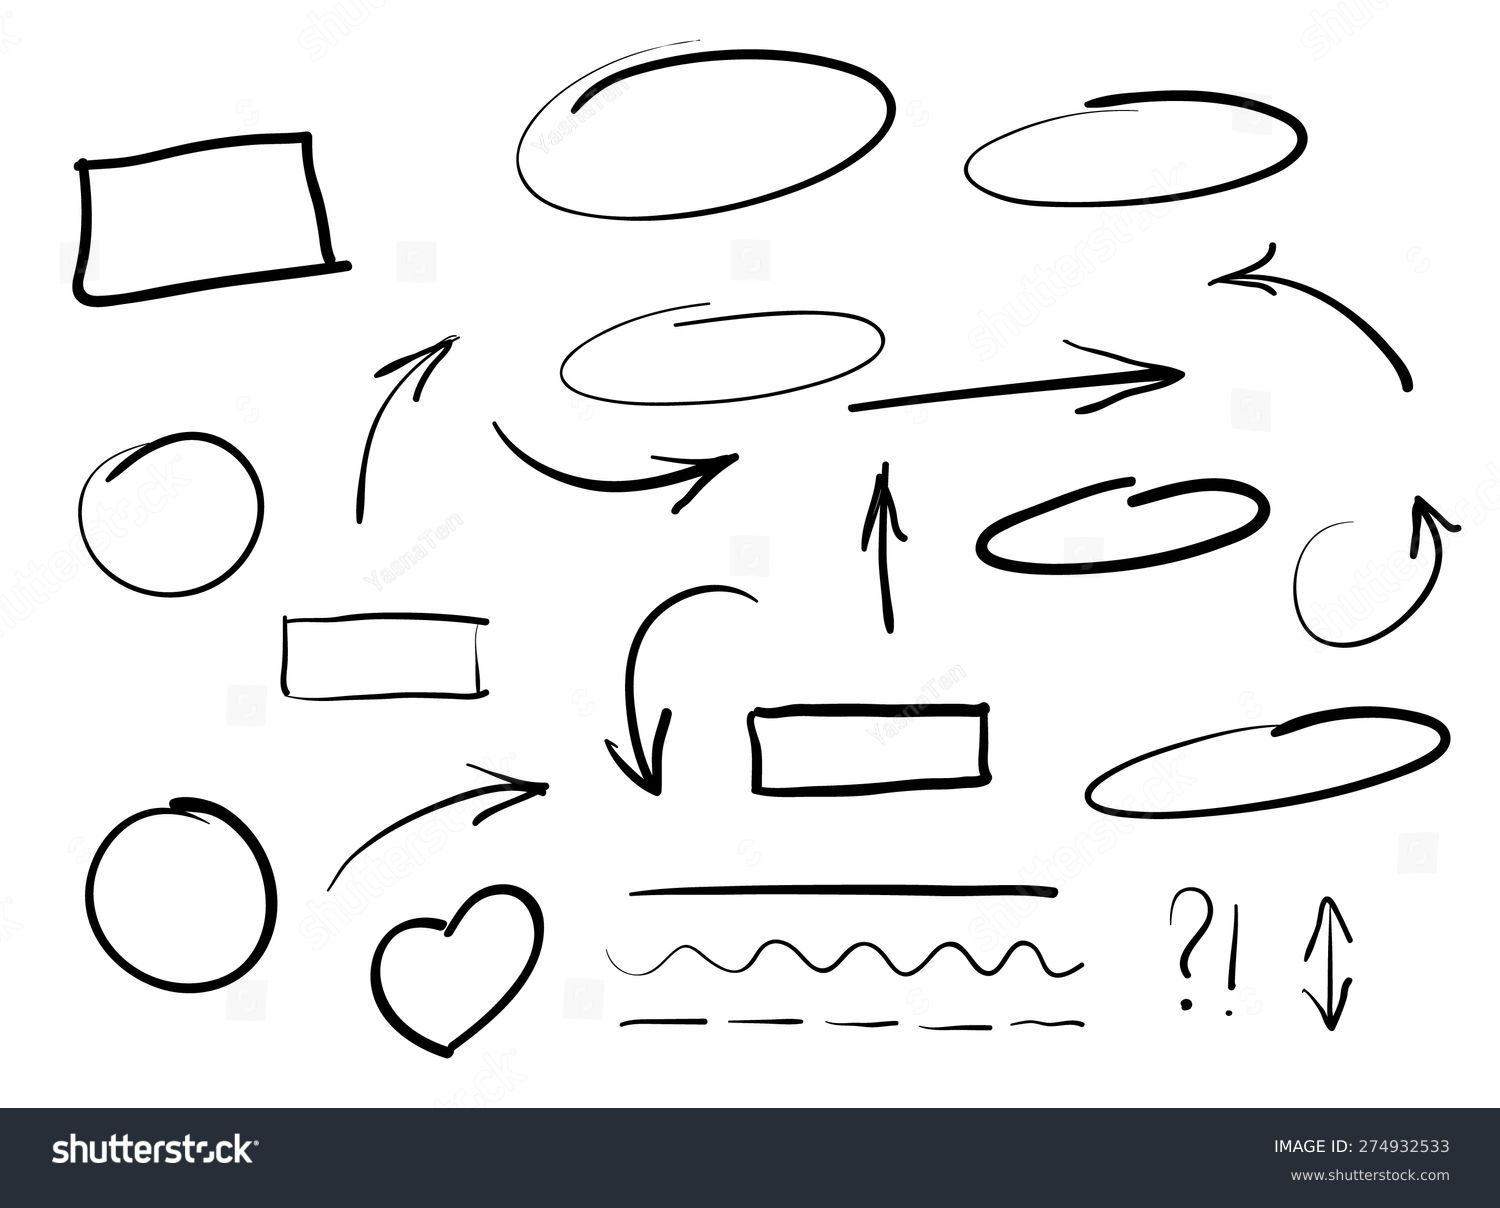 Arrows circles and abstract doodle writing design vector set #274932533